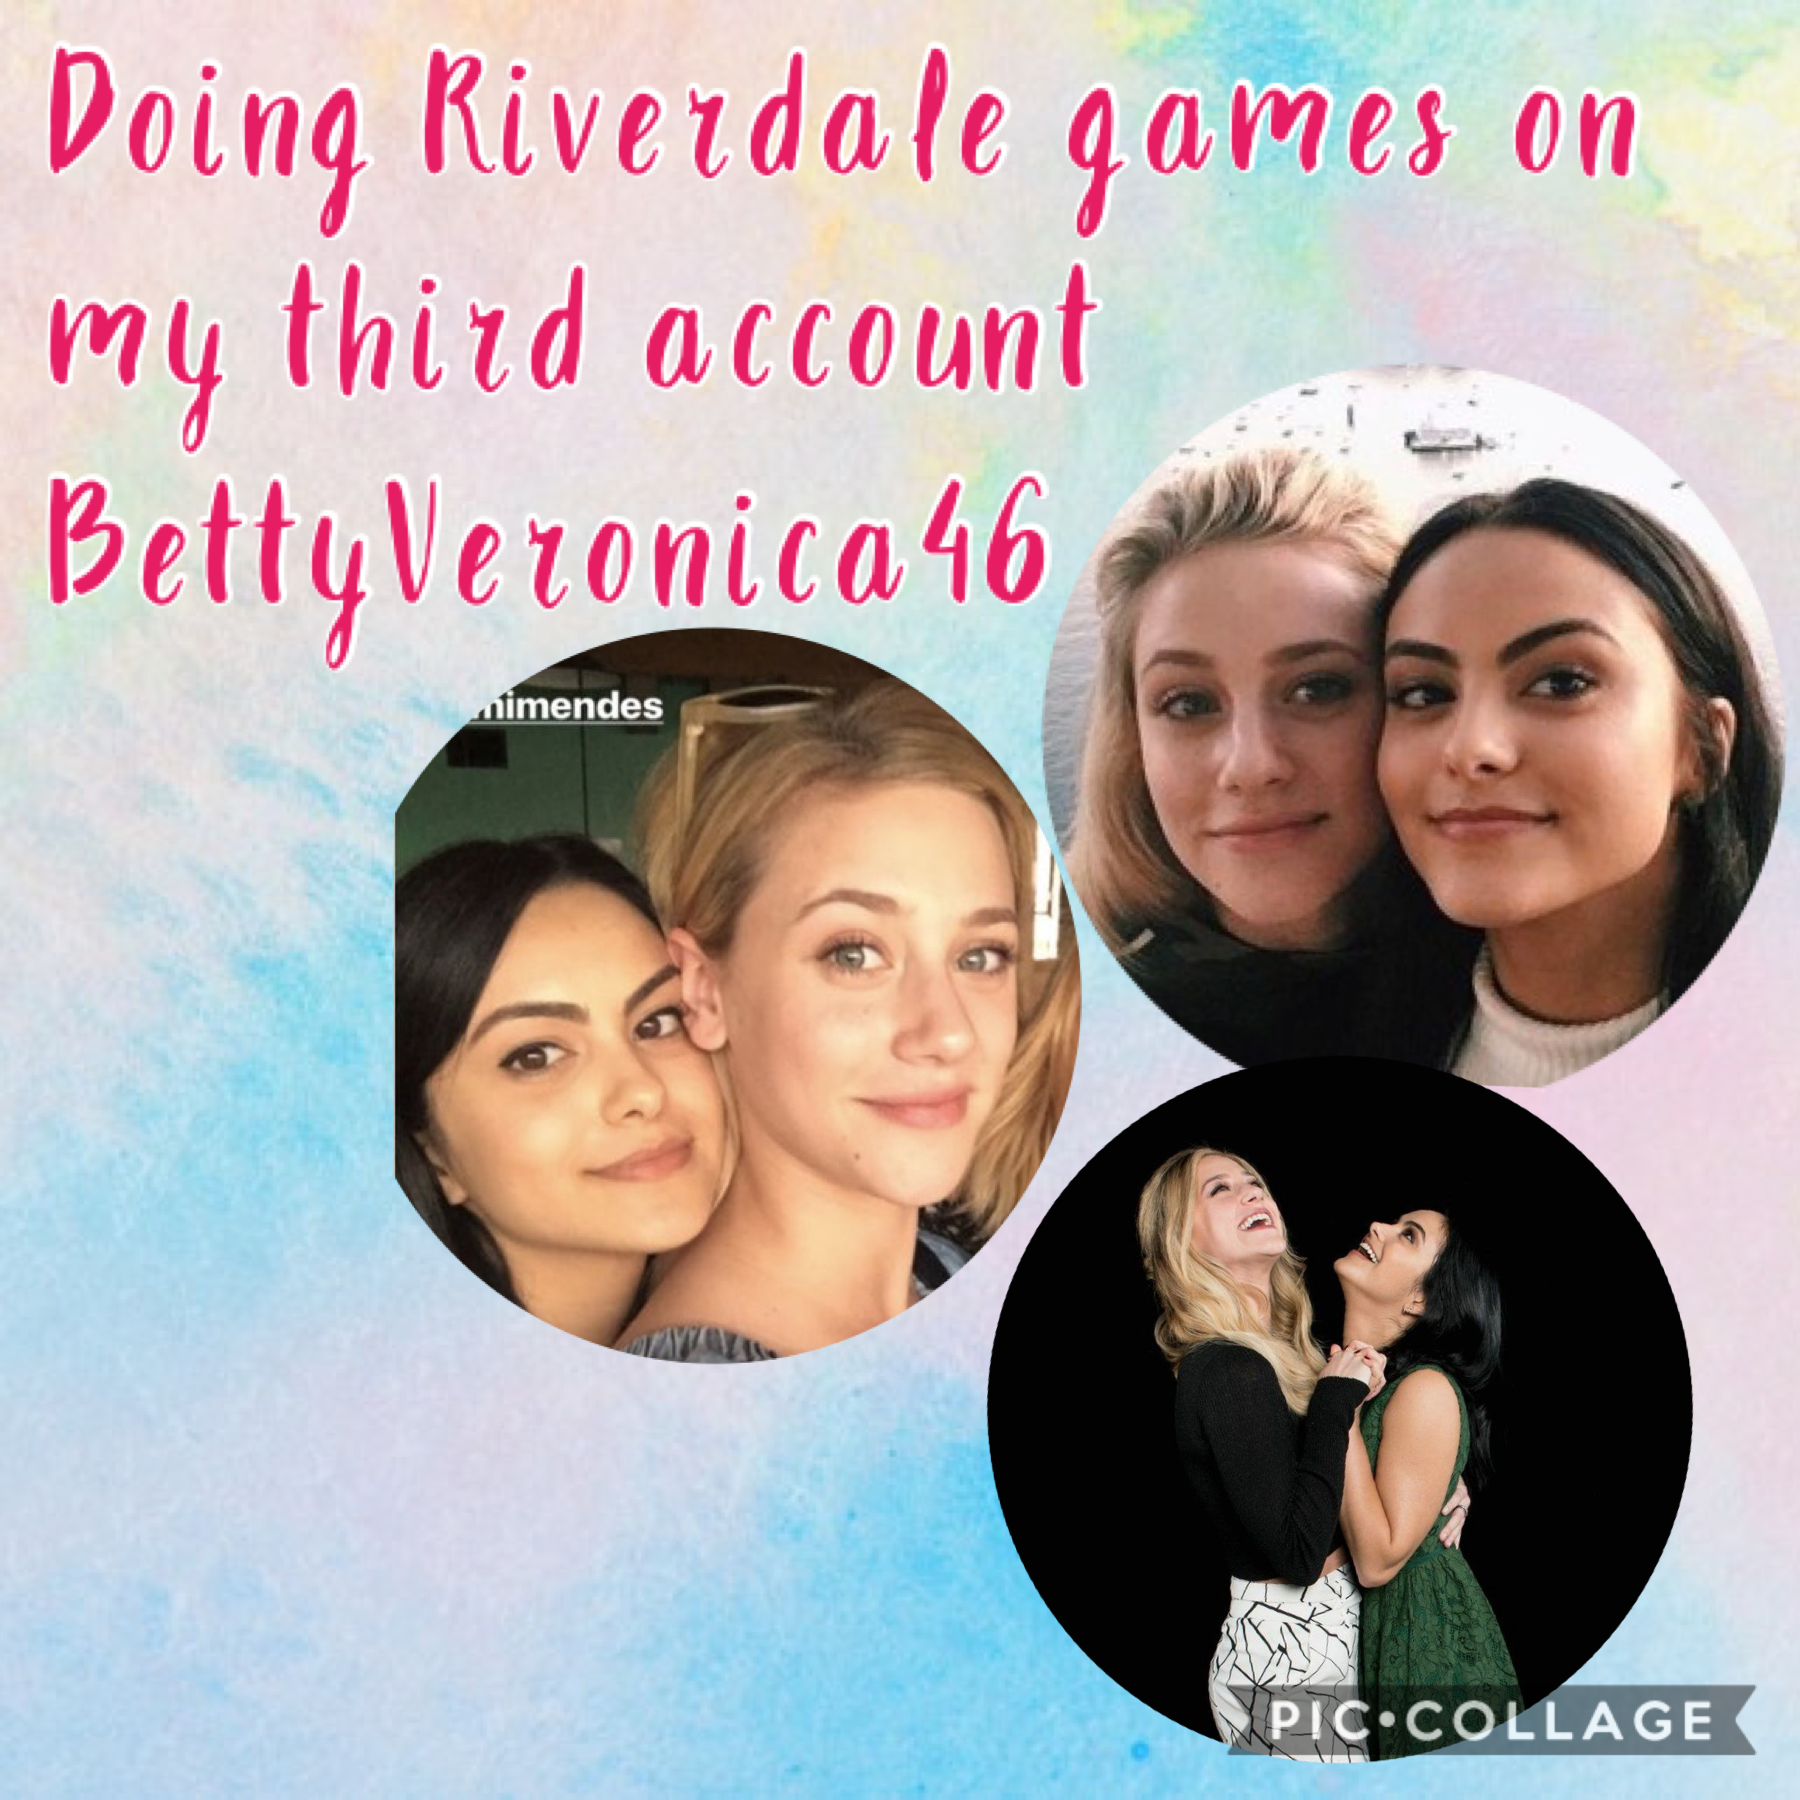 Doing riverdale games on my third account BettyVeronica46.